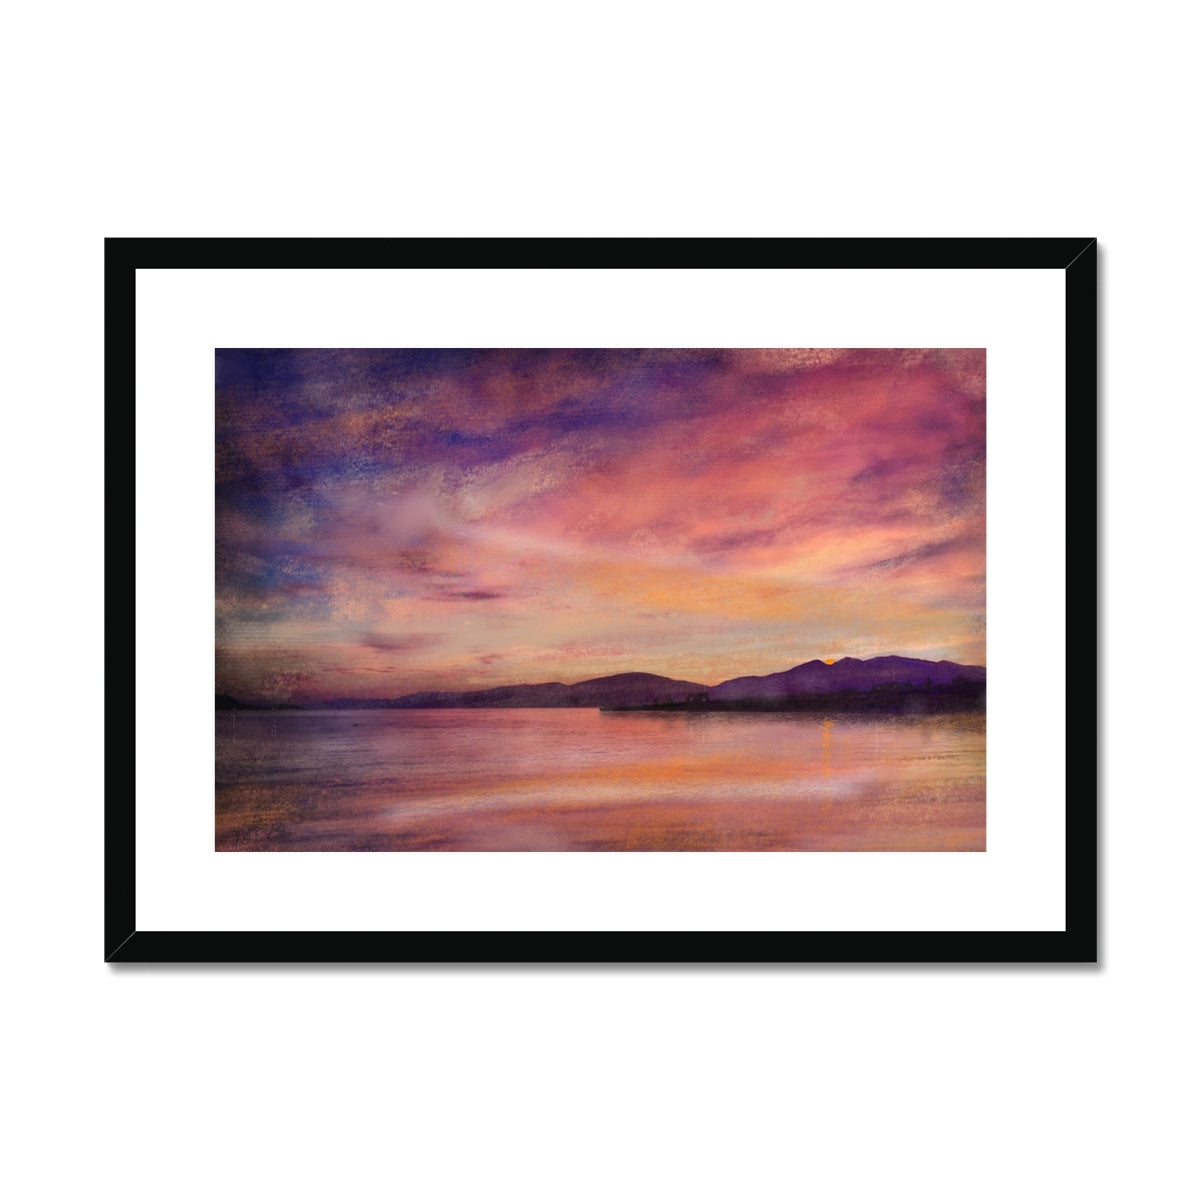 Loch Linnhe Dusk Painting | Framed & Mounted Prints From Scotland-Framed & Mounted Prints-Scottish Lochs & Mountains Art Gallery-A2 Landscape-Black Frame-Paintings, Prints, Homeware, Art Gifts From Scotland By Scottish Artist Kevin Hunter